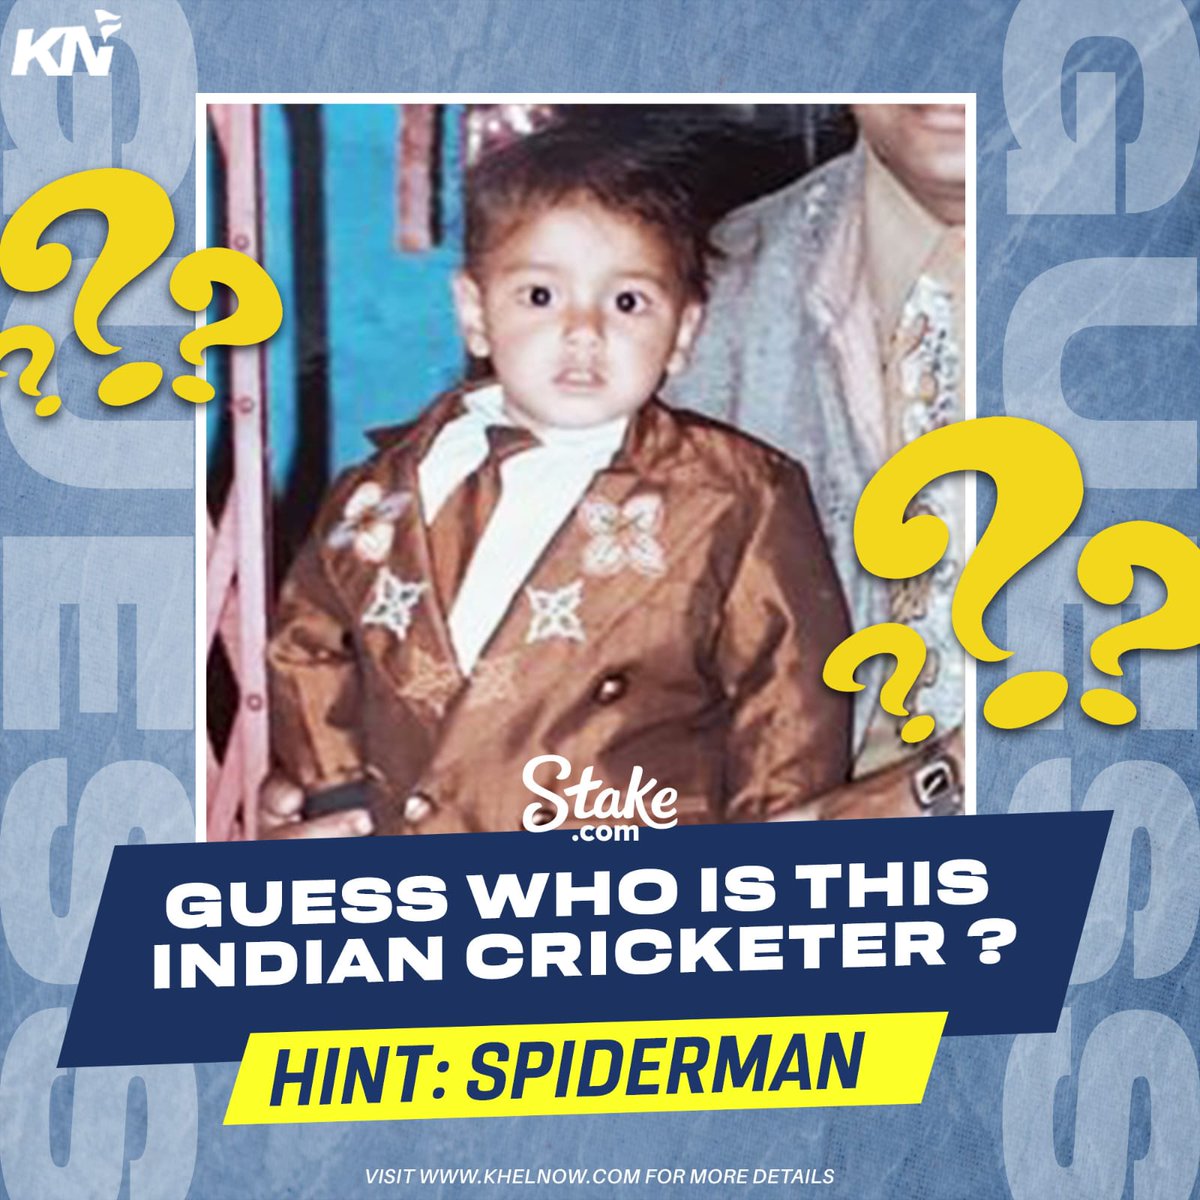 Guess which Indian cricketer's childhood photo is this. 

#Cricket #TestCricket #IndianCricketteam #India #BCCI #IPL #IPL2024